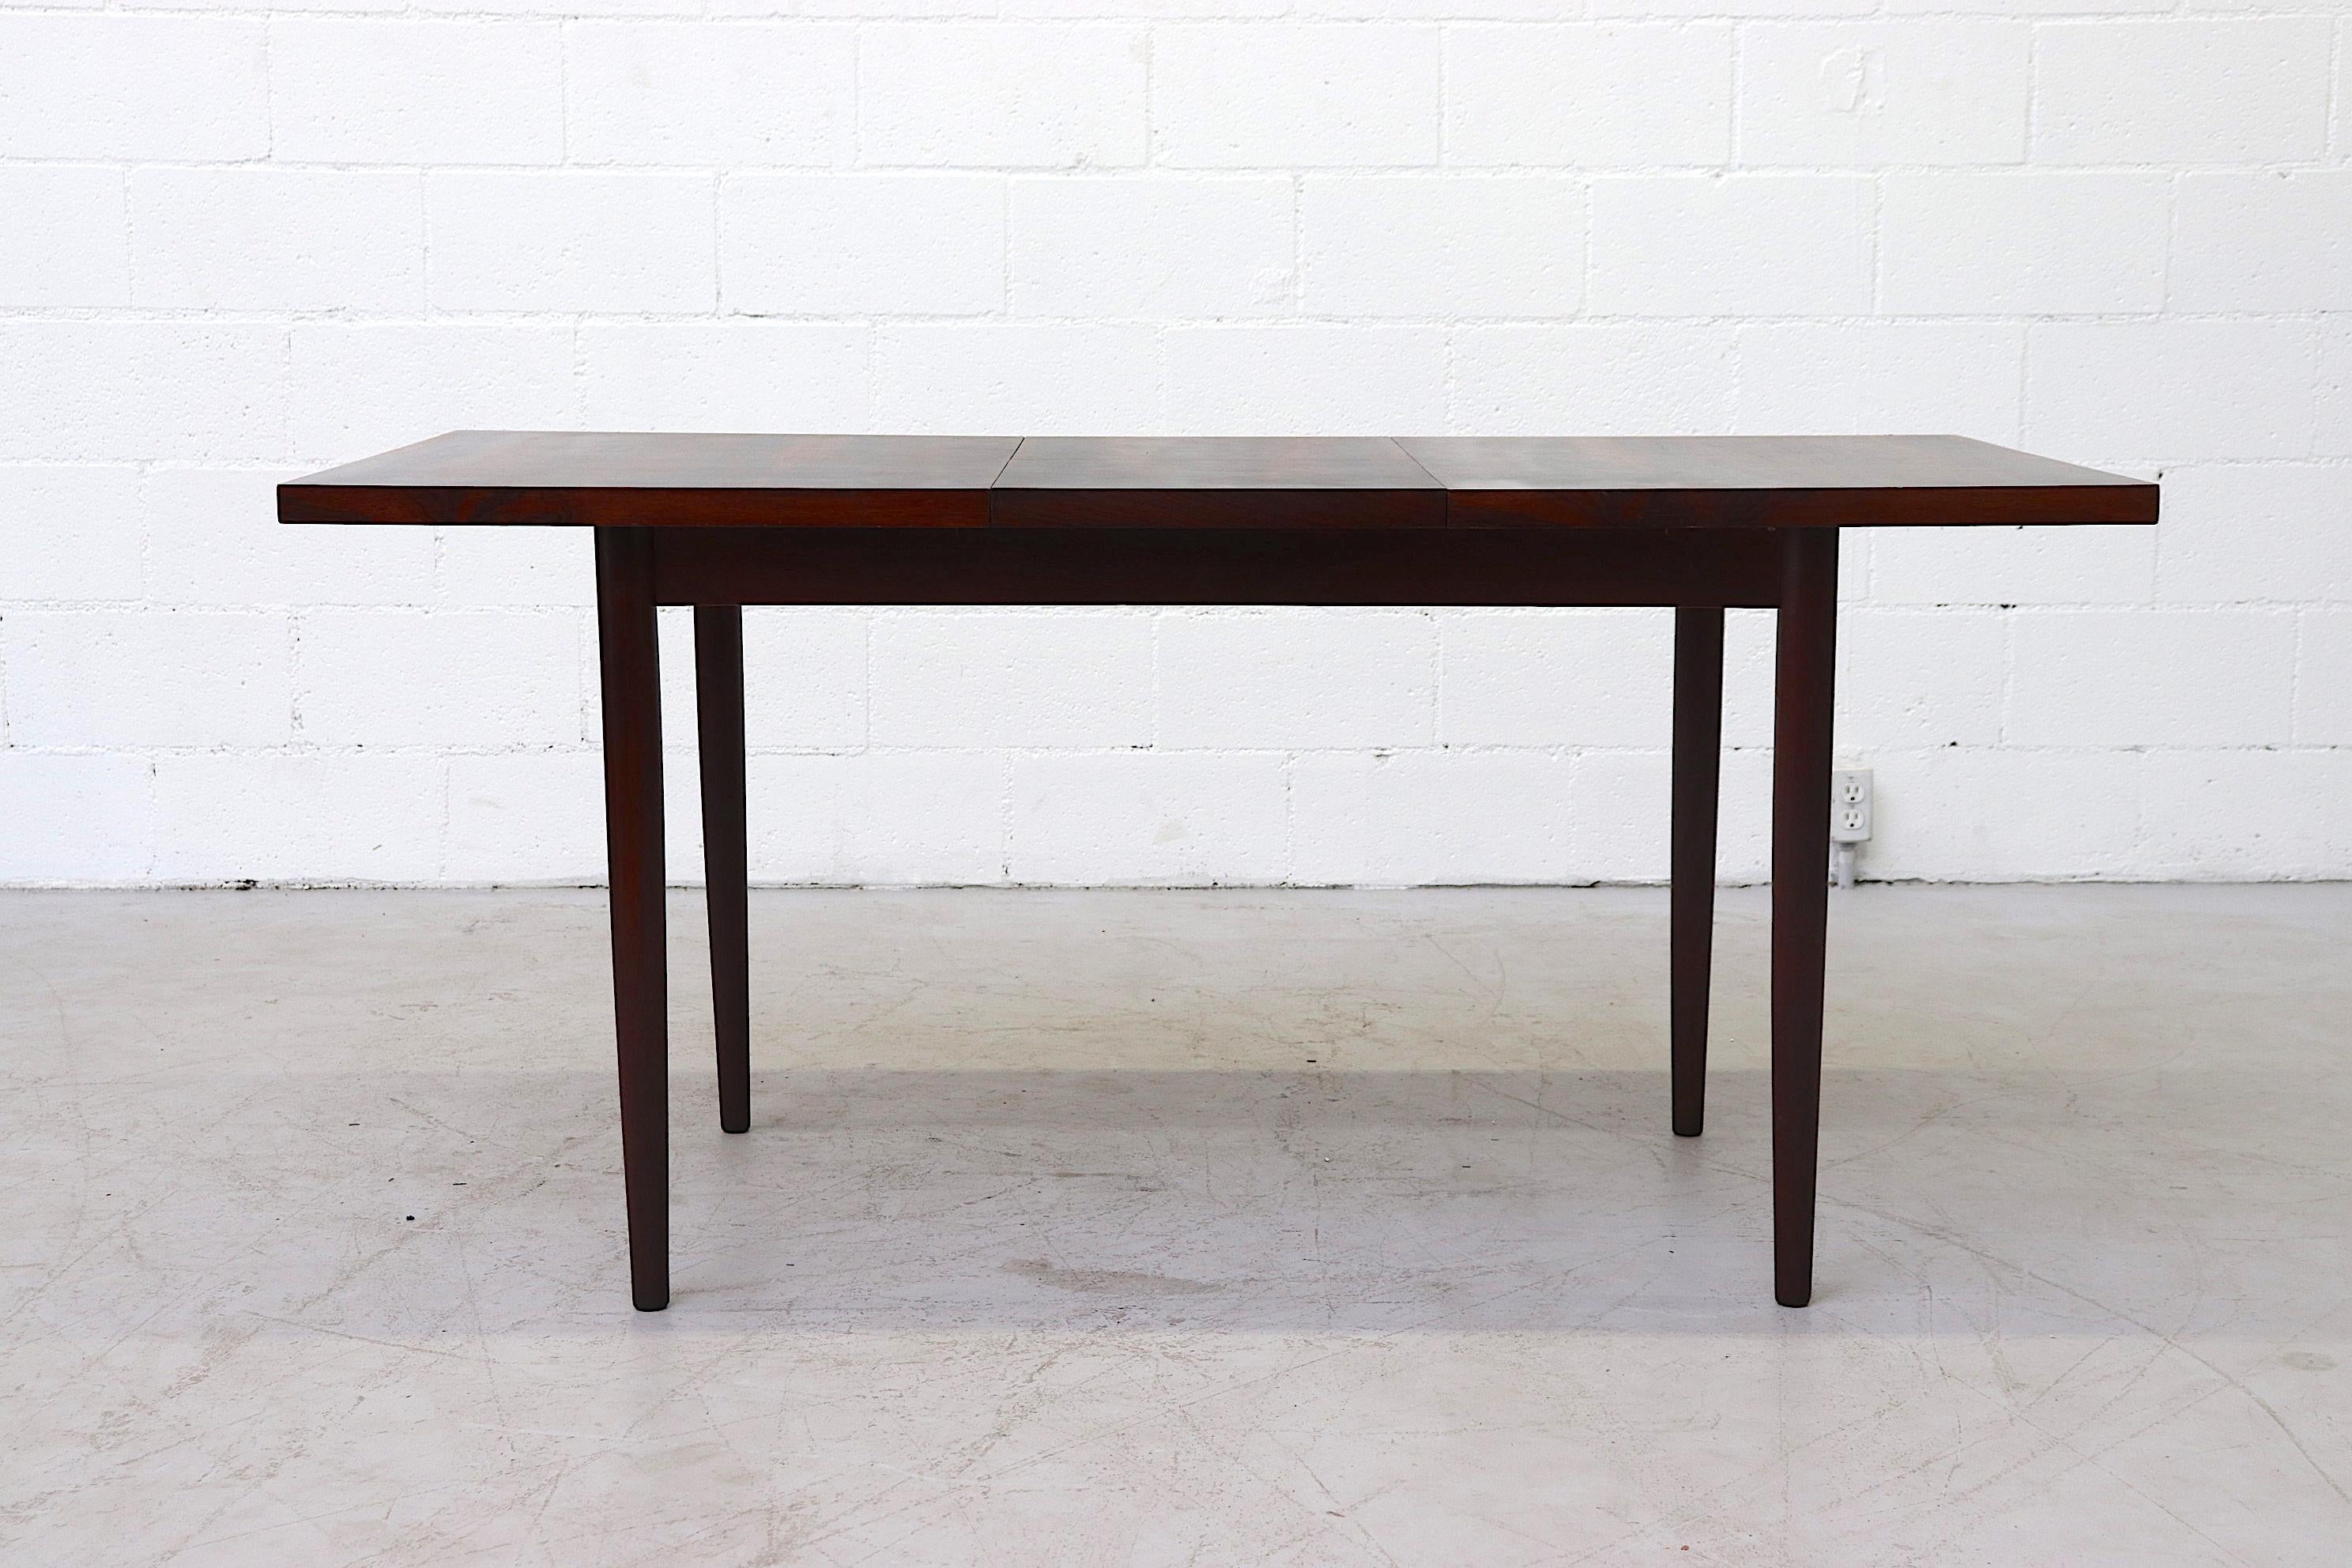 Beautiful rosewood dining table with hidden leaf and lightly refinished with round wood legs. In original condition with wear consistent with age. Table extends to 62.5